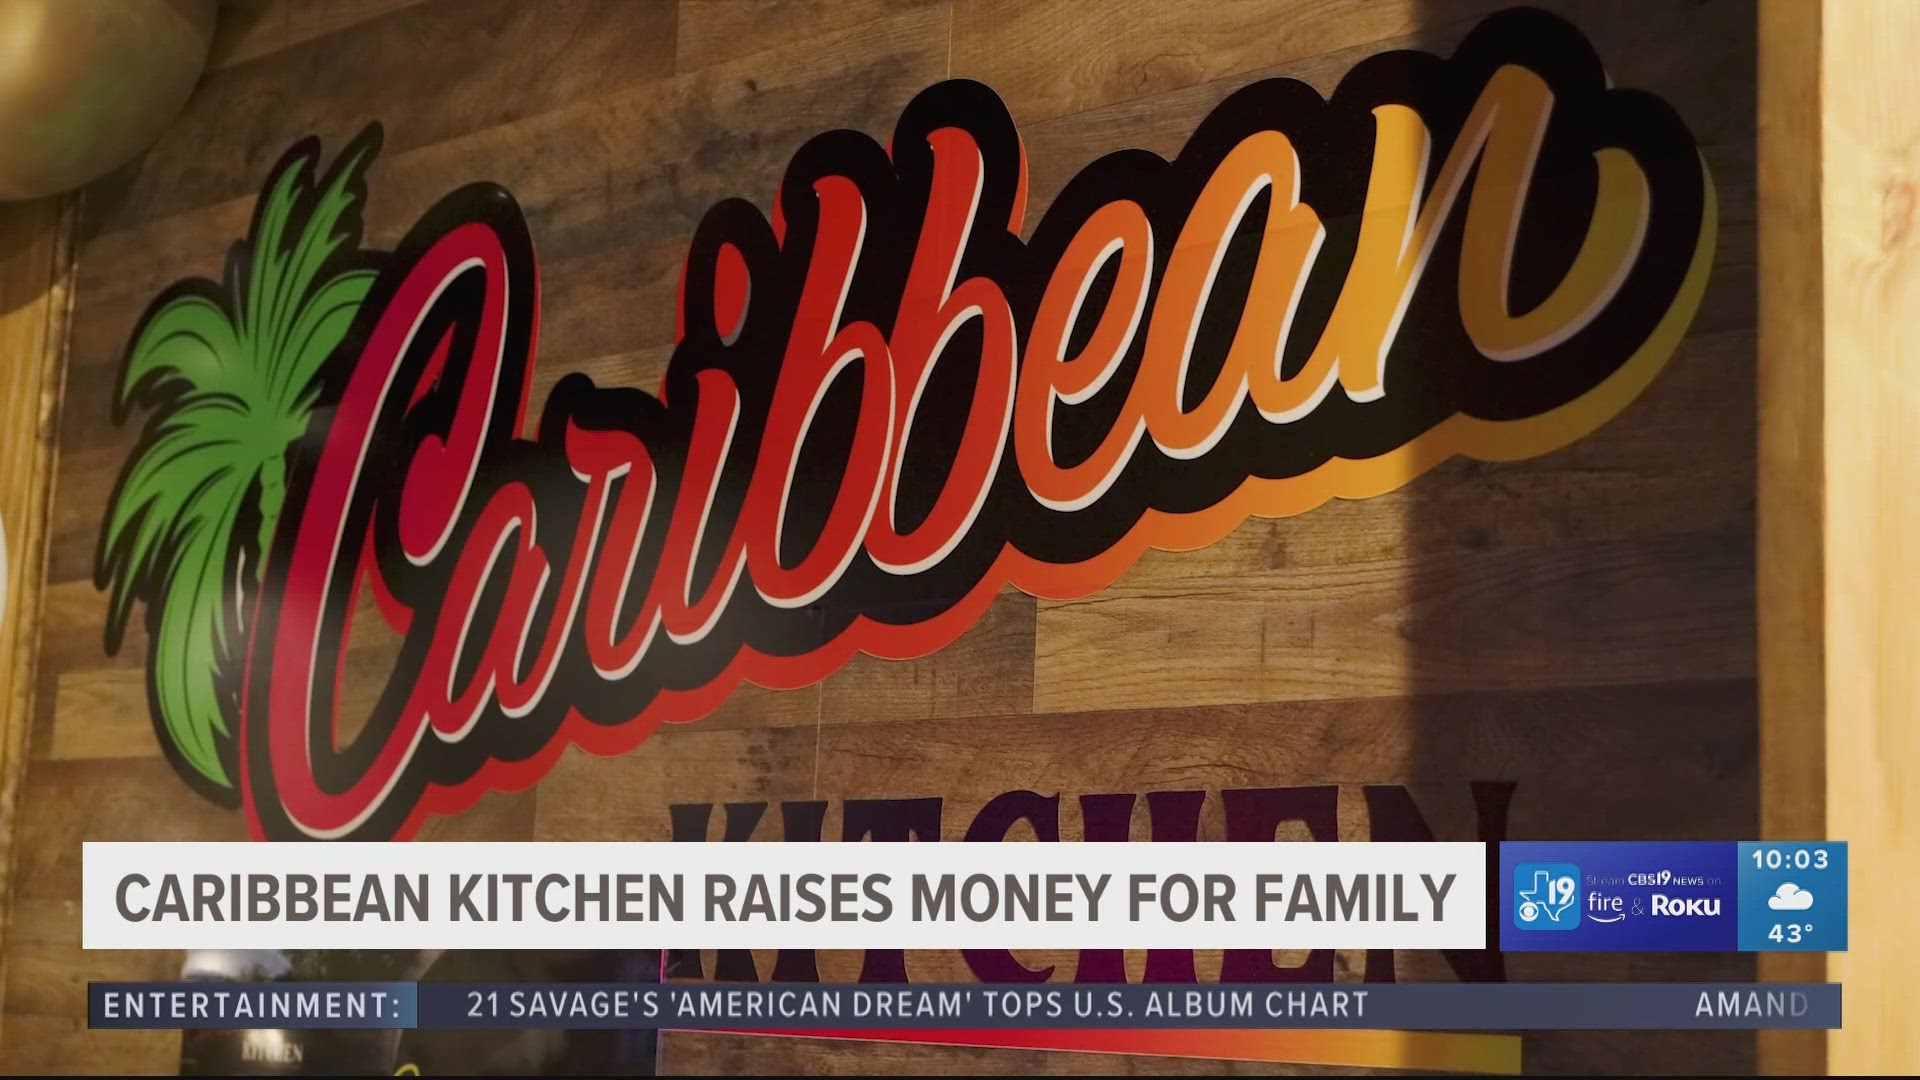 If you would like to help donate, reach out to the Caribbean Kitchen at (903) 660-5557.